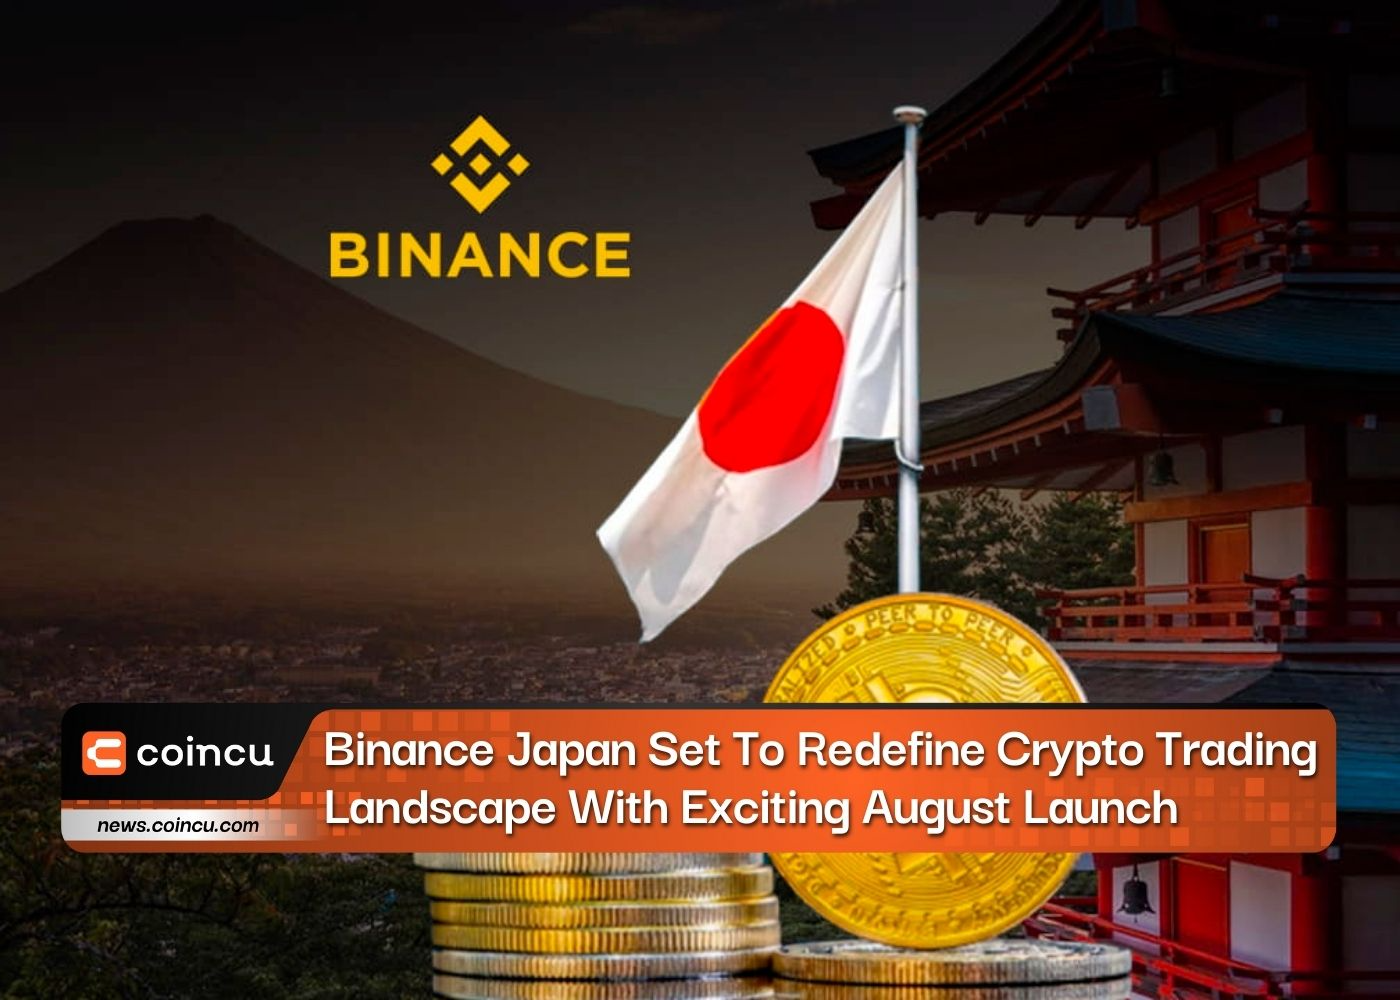 Binance Japan Set To Redefine Crypto Trading Landscape With Exciting August Launch